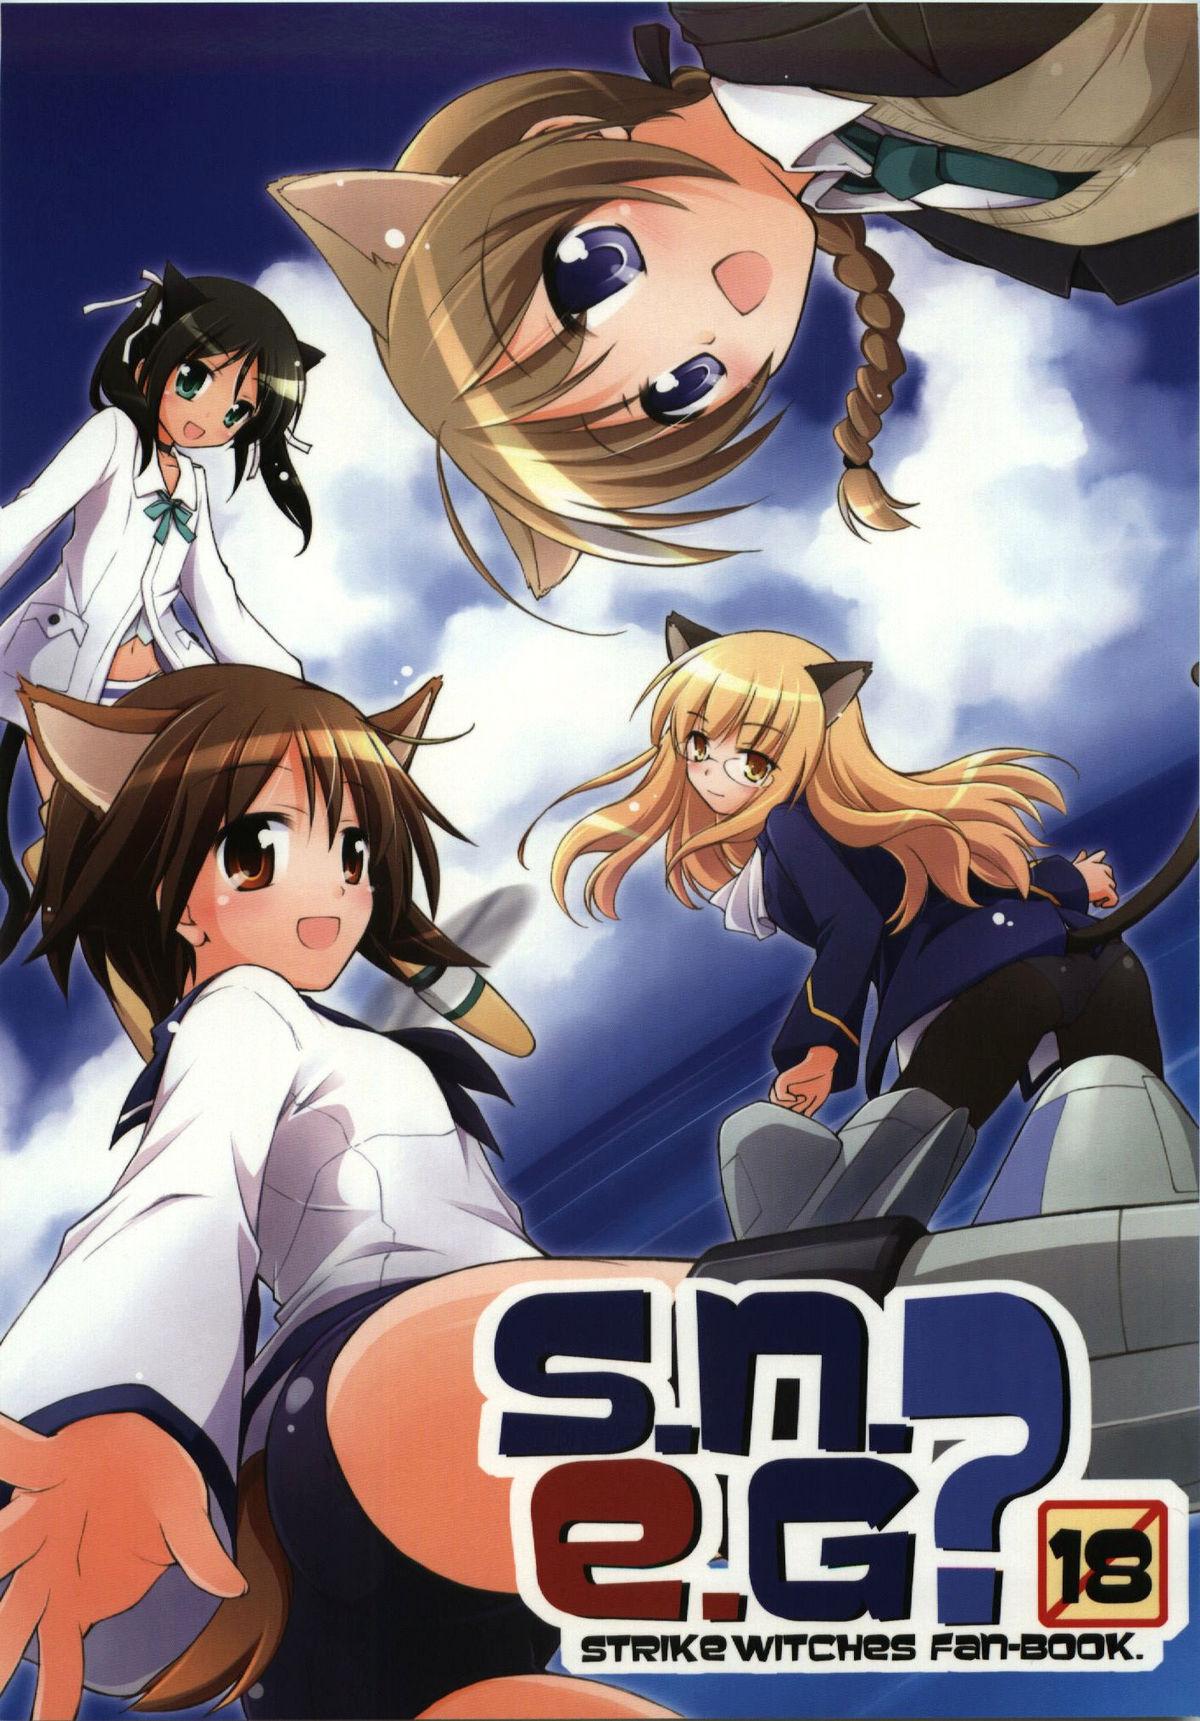 Cdmx s.n.e.g? - Strike witches Webcams - Page 1